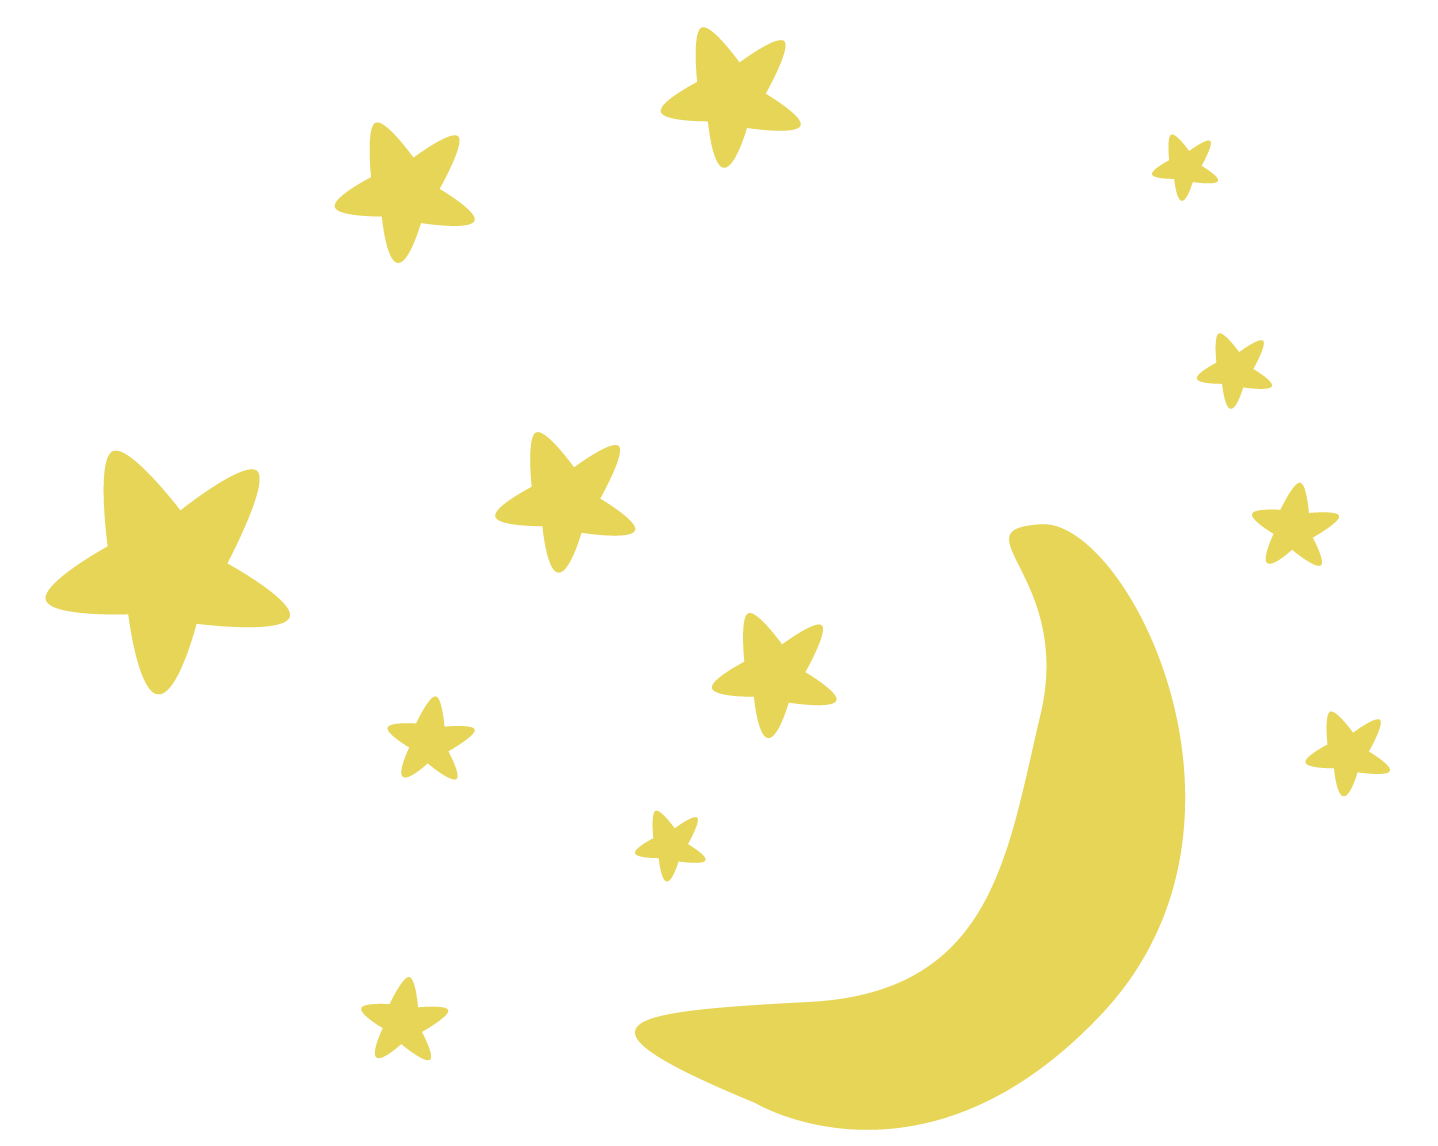 And Pattern Twitter Moon Computer Stars Line PNG Image